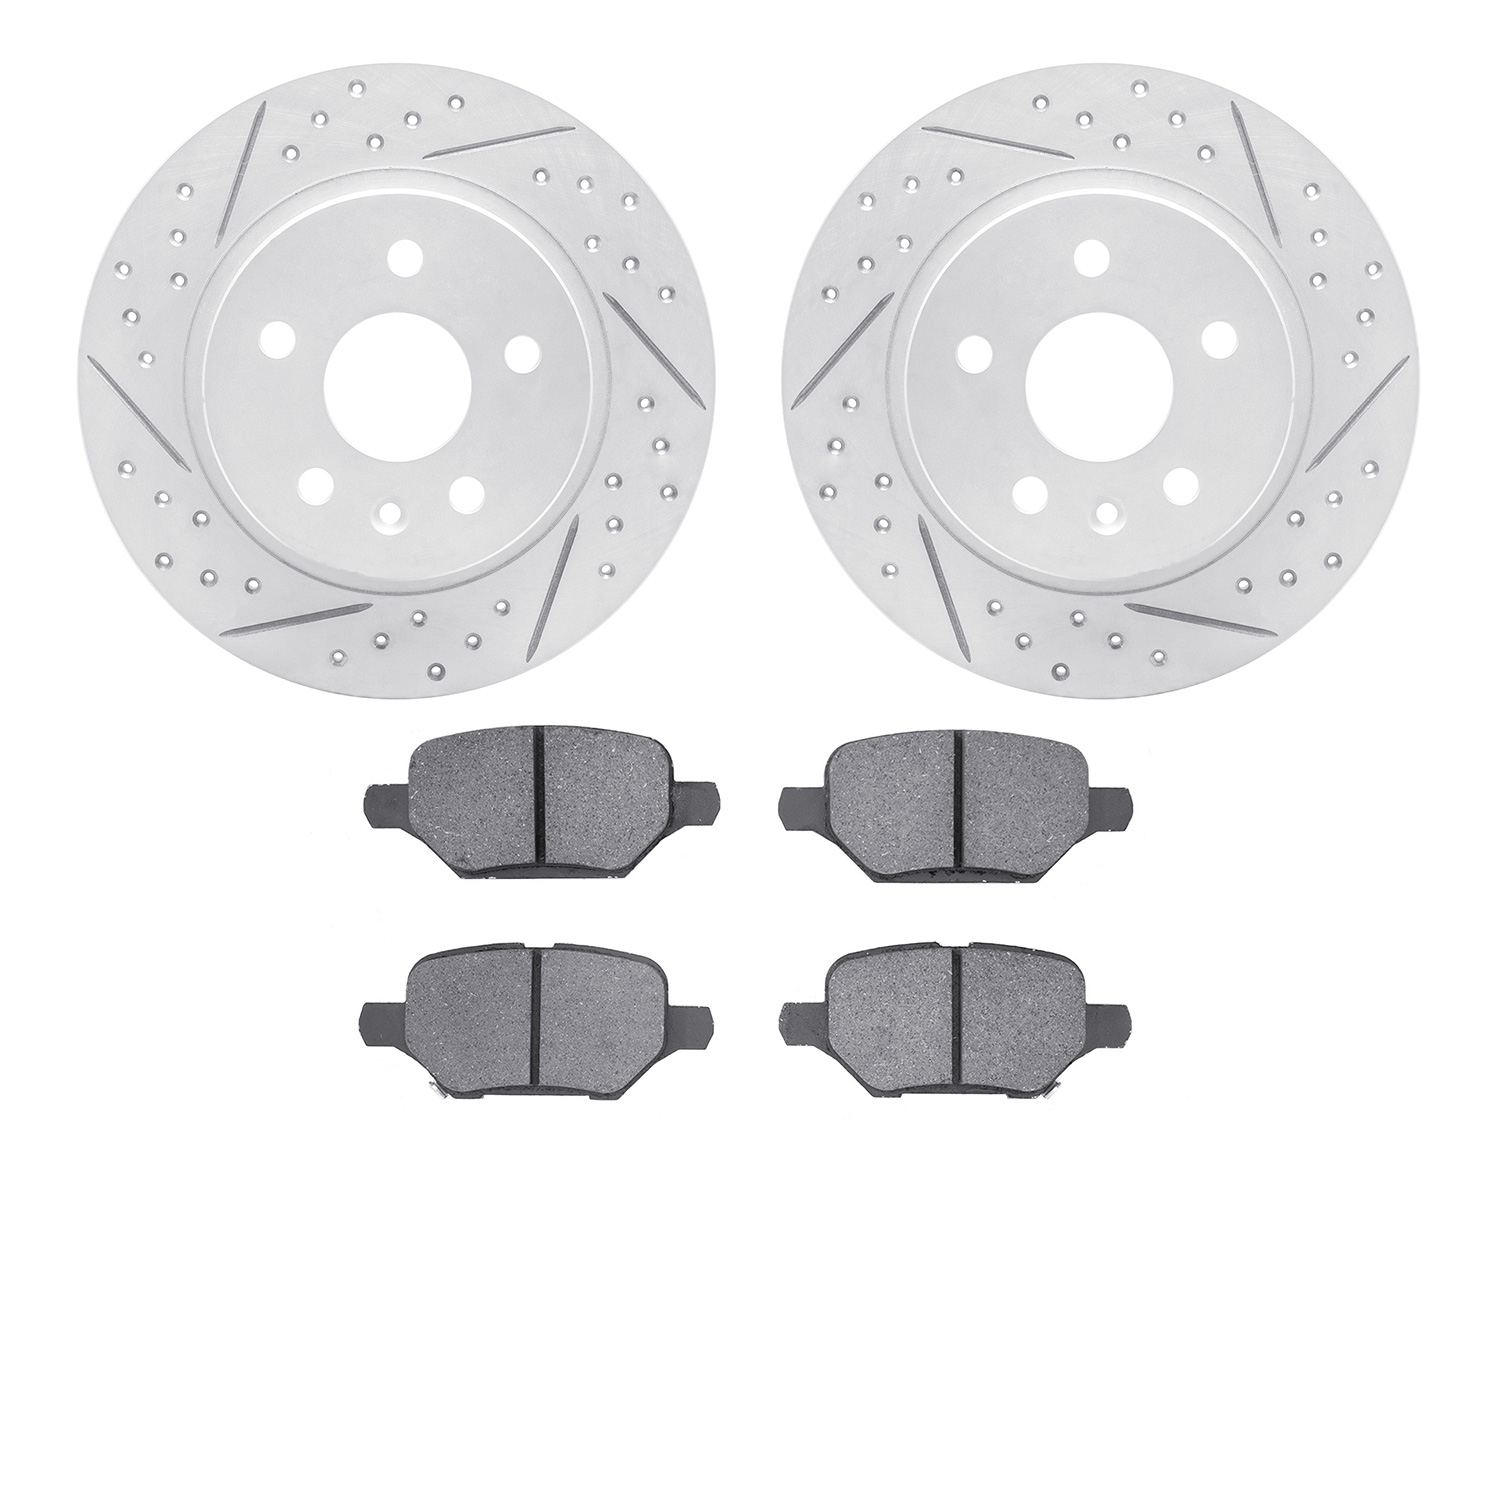 2502-45026 Geoperformance Drilled/Slotted Rotors w/5000 Advanced Brake Pads Kit, Fits Select GM, Position: Rear